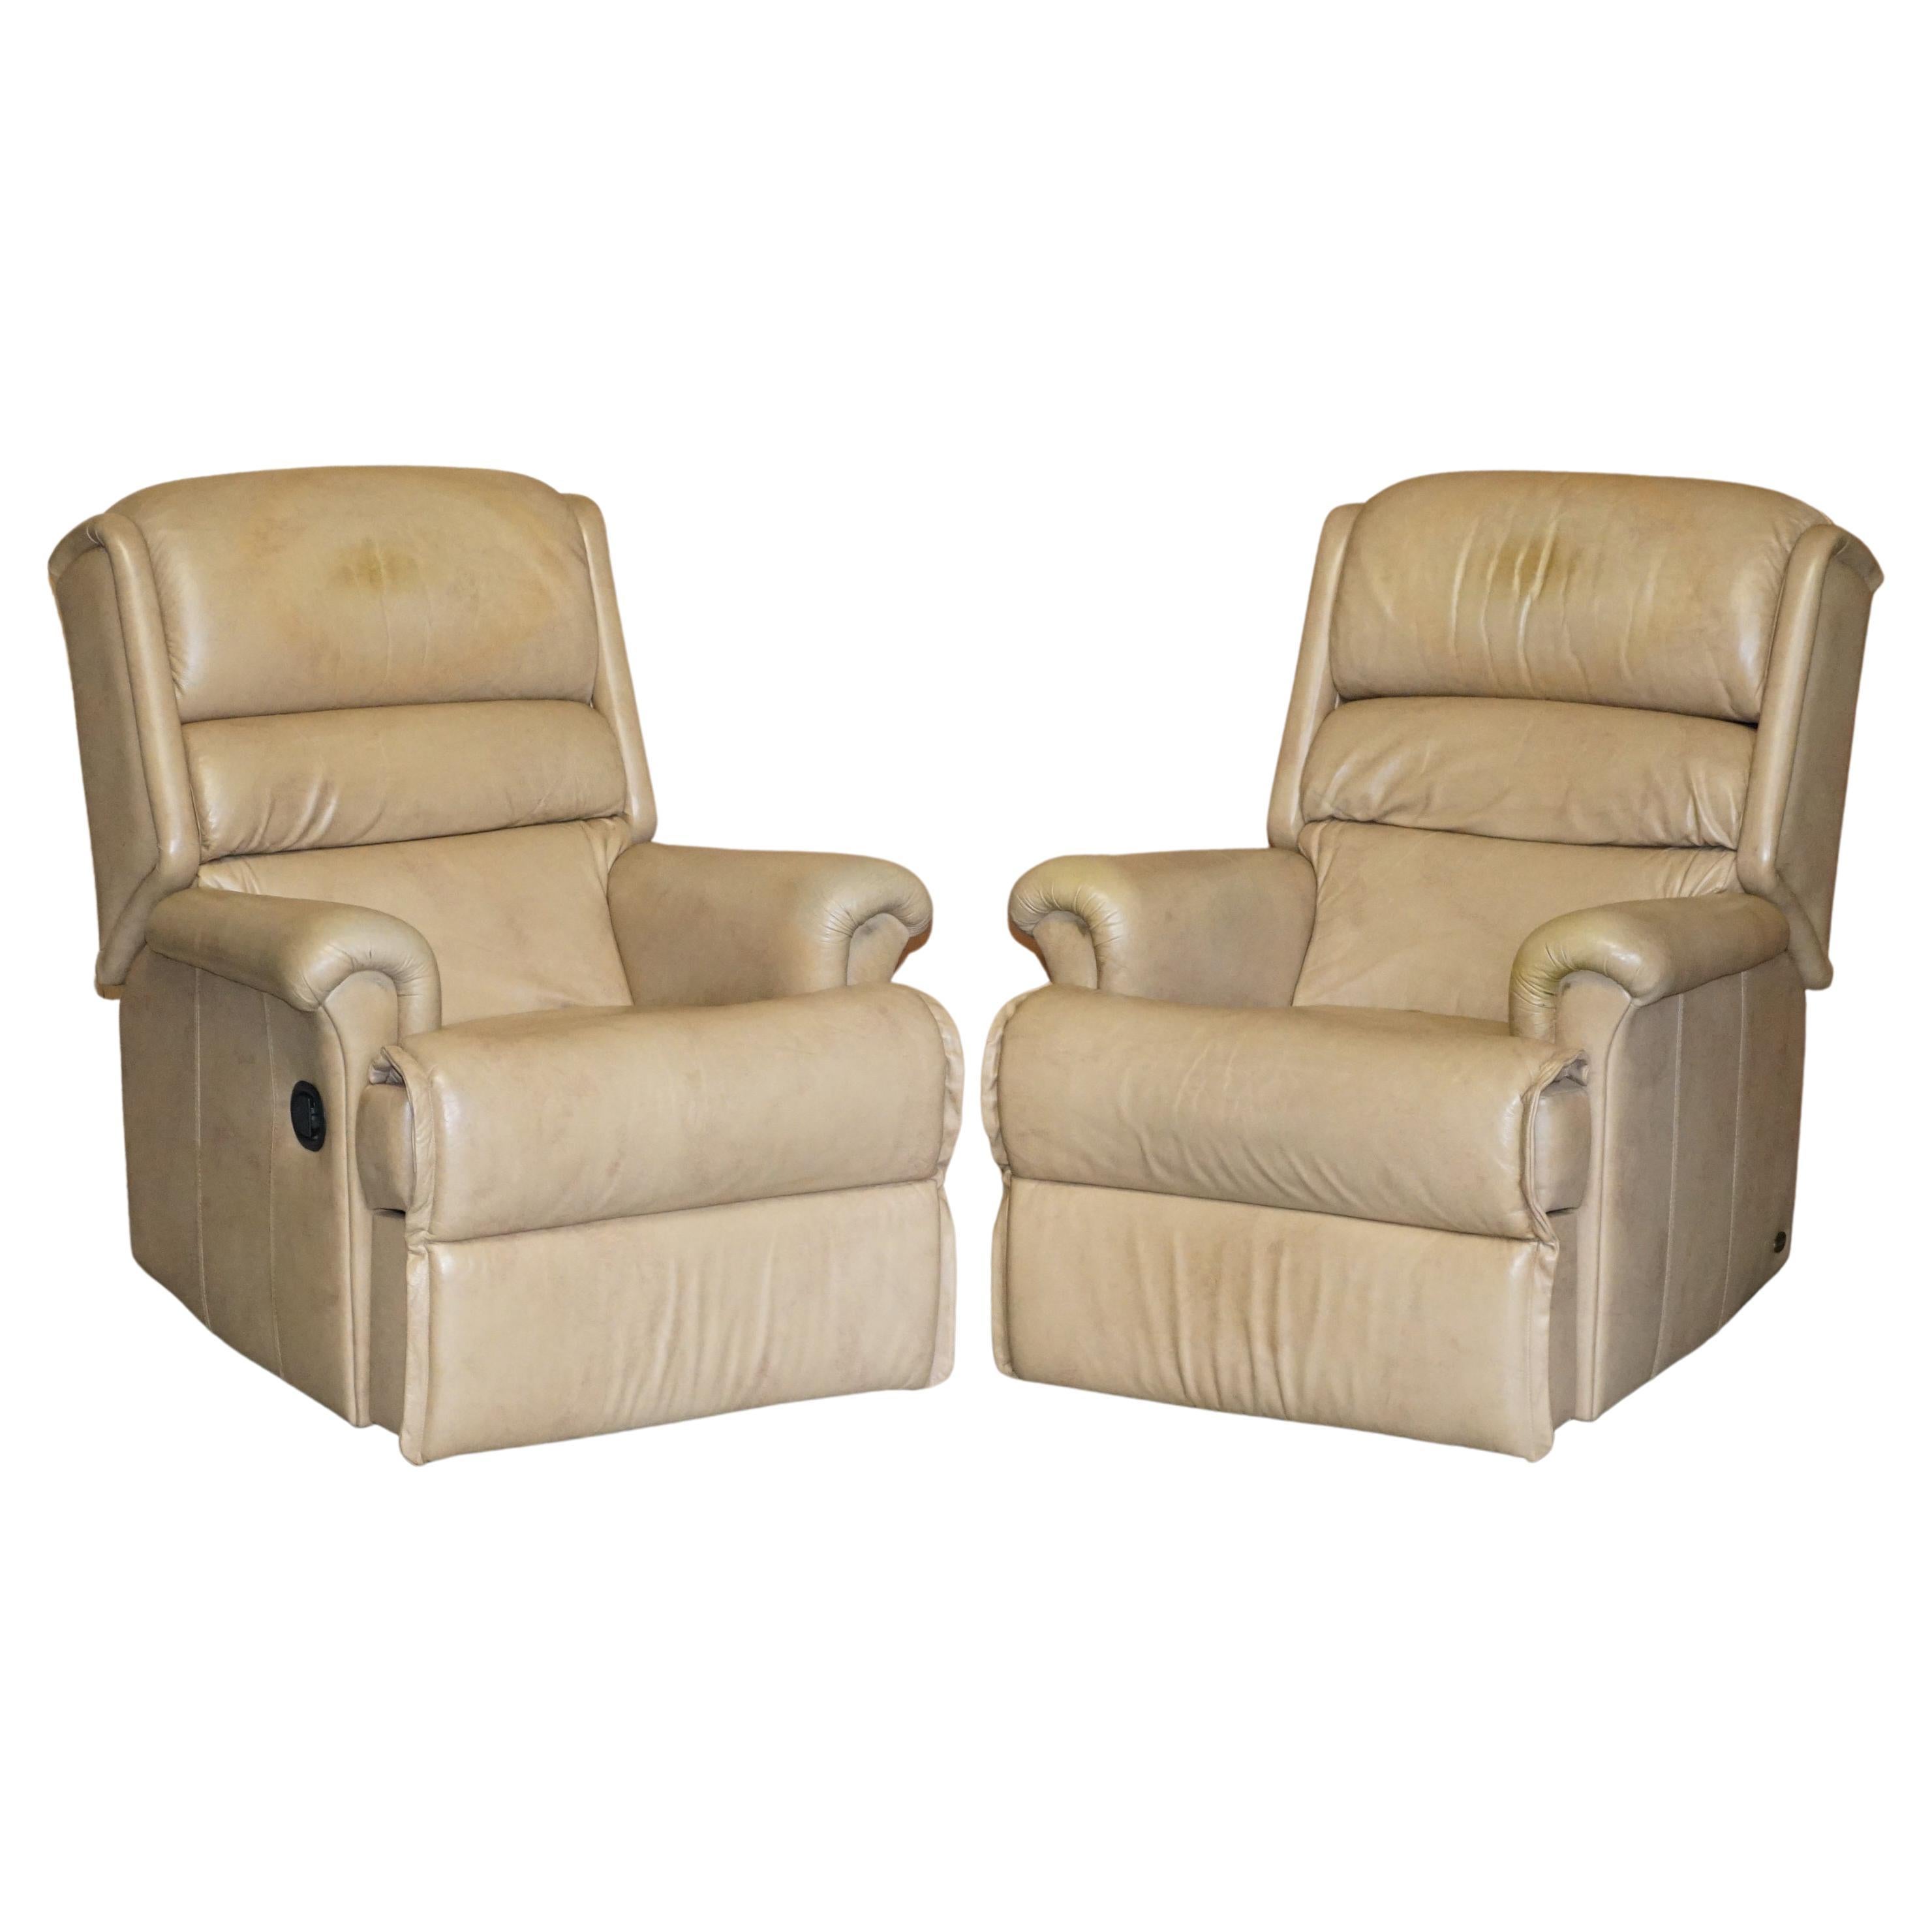 Comfortable Pair of Sherborne Nevada Reclining Armchairs in Leather